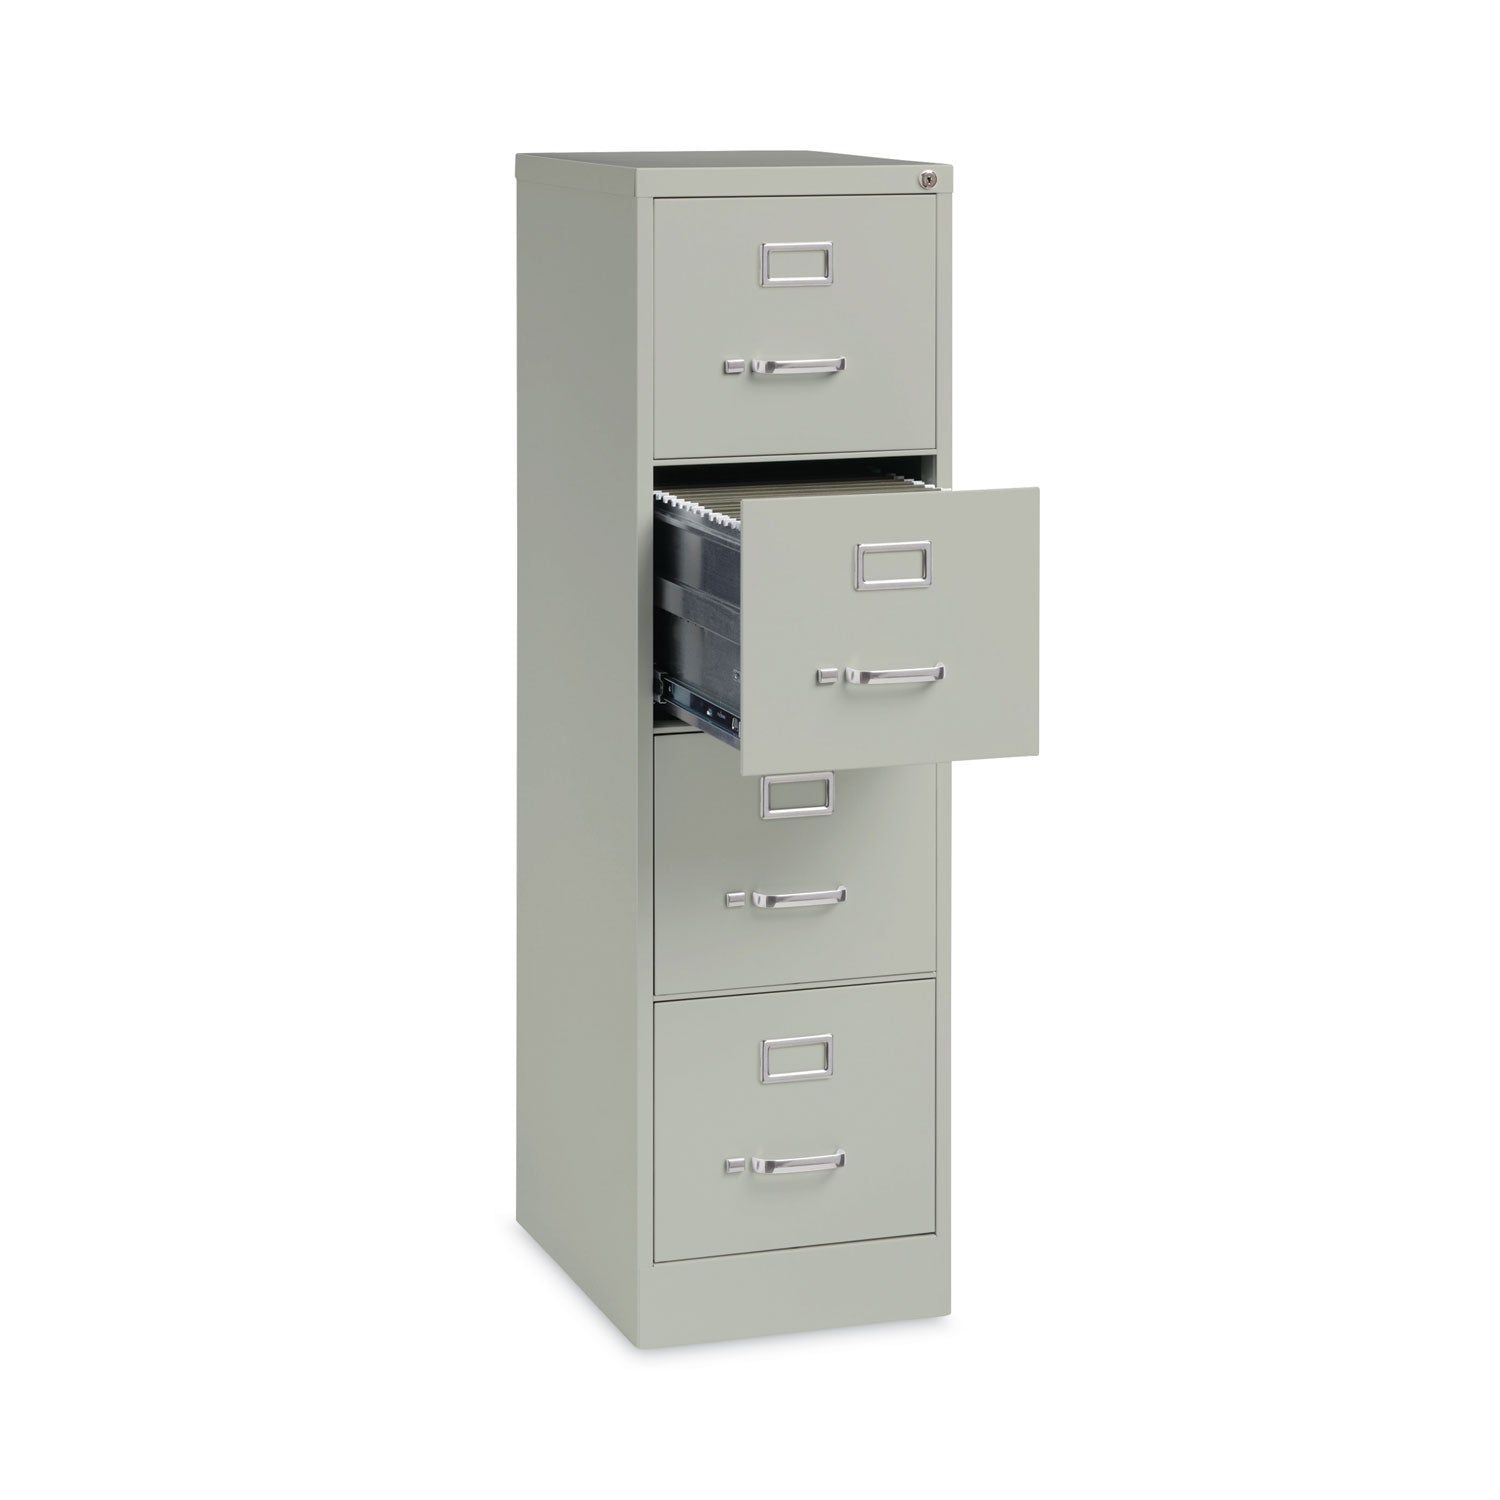 vertical-letter-file-cabinet-4-letter-size-file-drawers-light-gray-15-x-22-x-52_hid22733 - 4